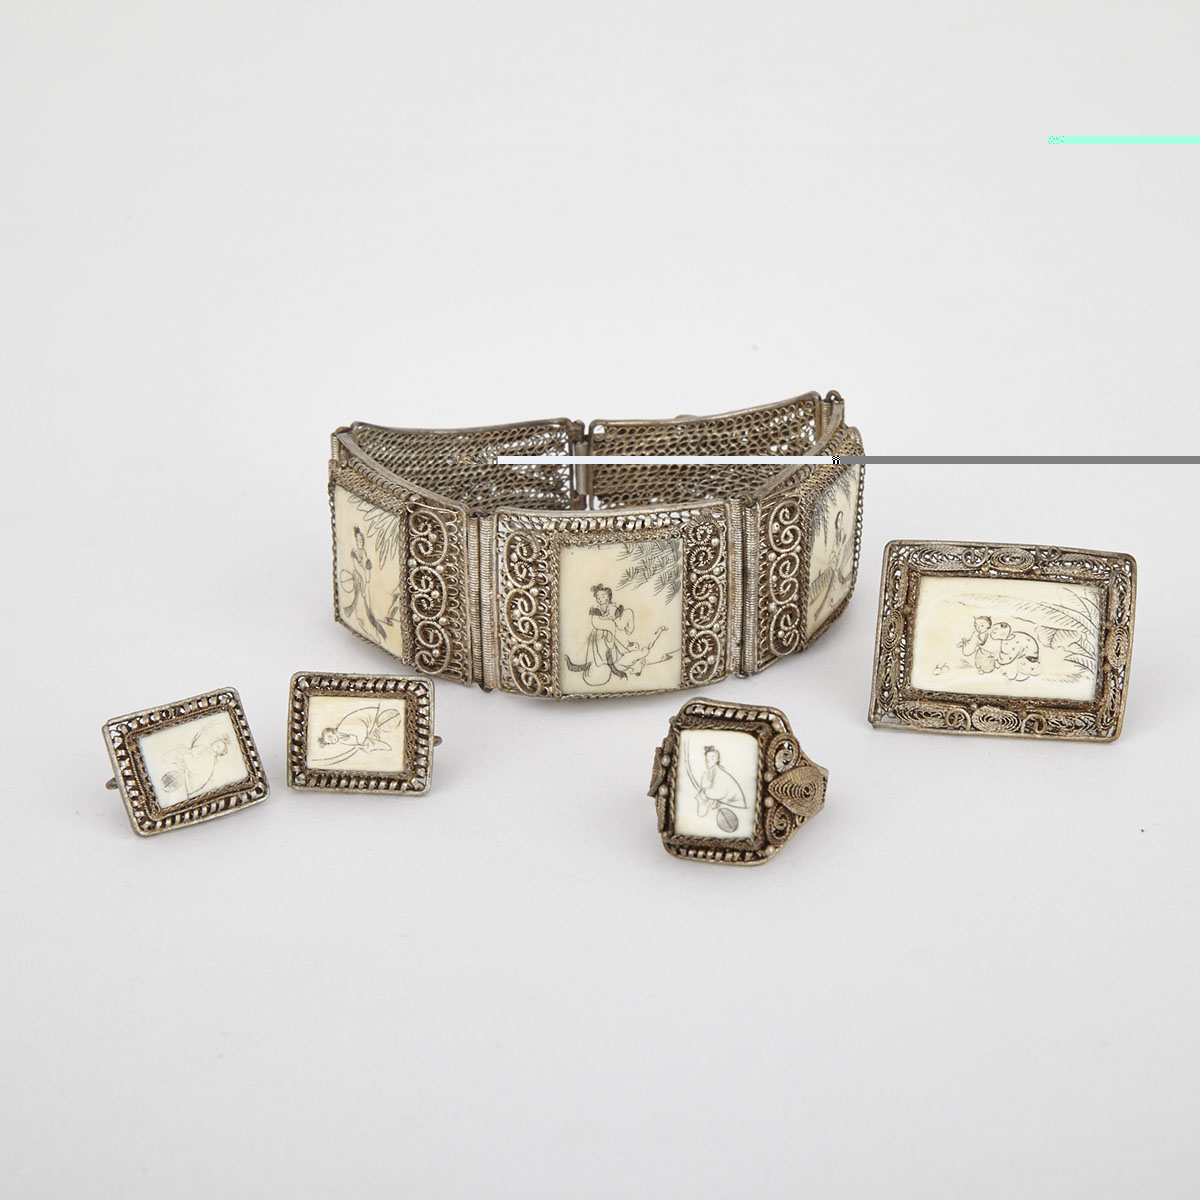 Carved Ivory Inlaid Jewelry Set, Early 20th Century